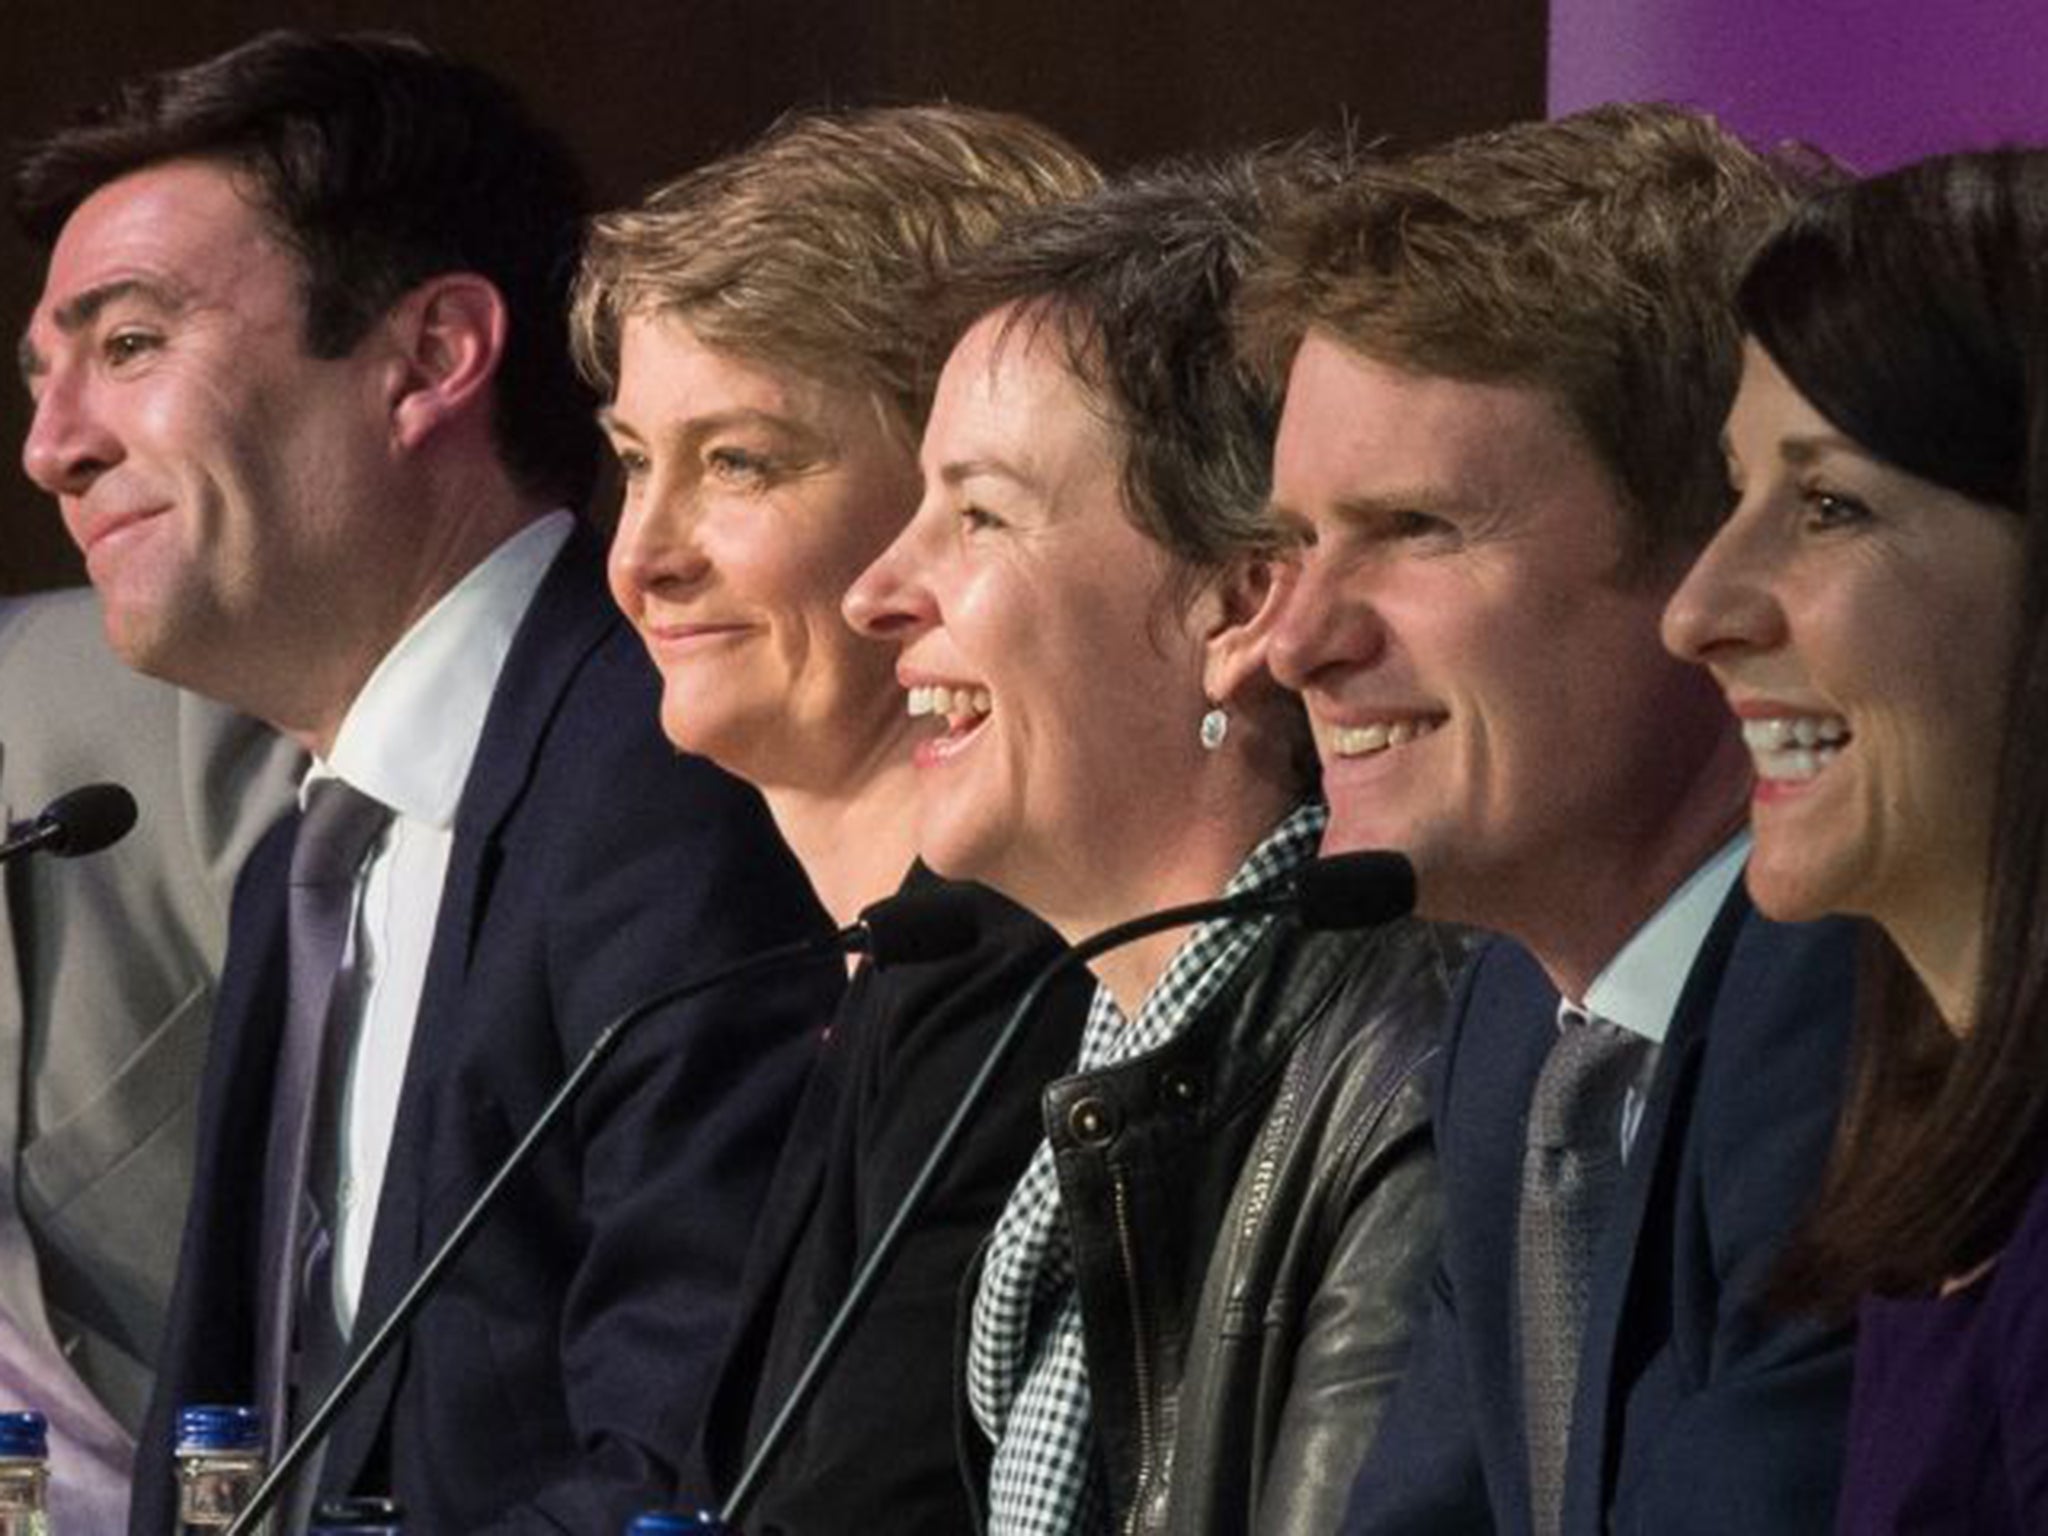 Left to right: Andy Burnham, Yvette Cooper, Mary Creagh, Tristram Hunt and Liz Kendall 